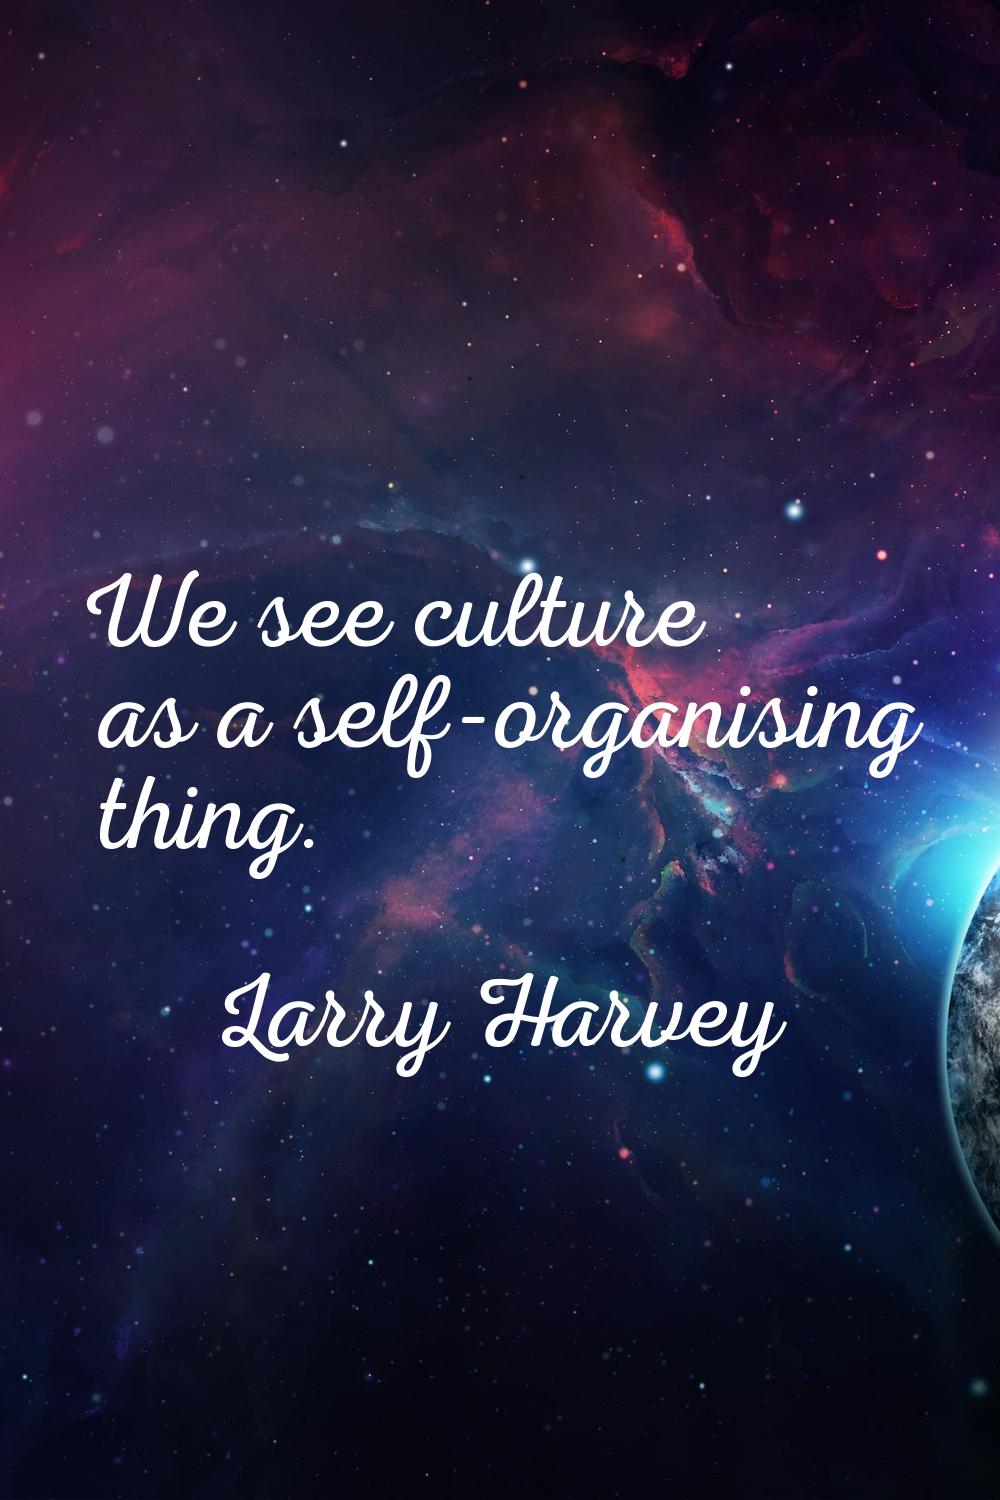 We see culture as a self-organising thing.